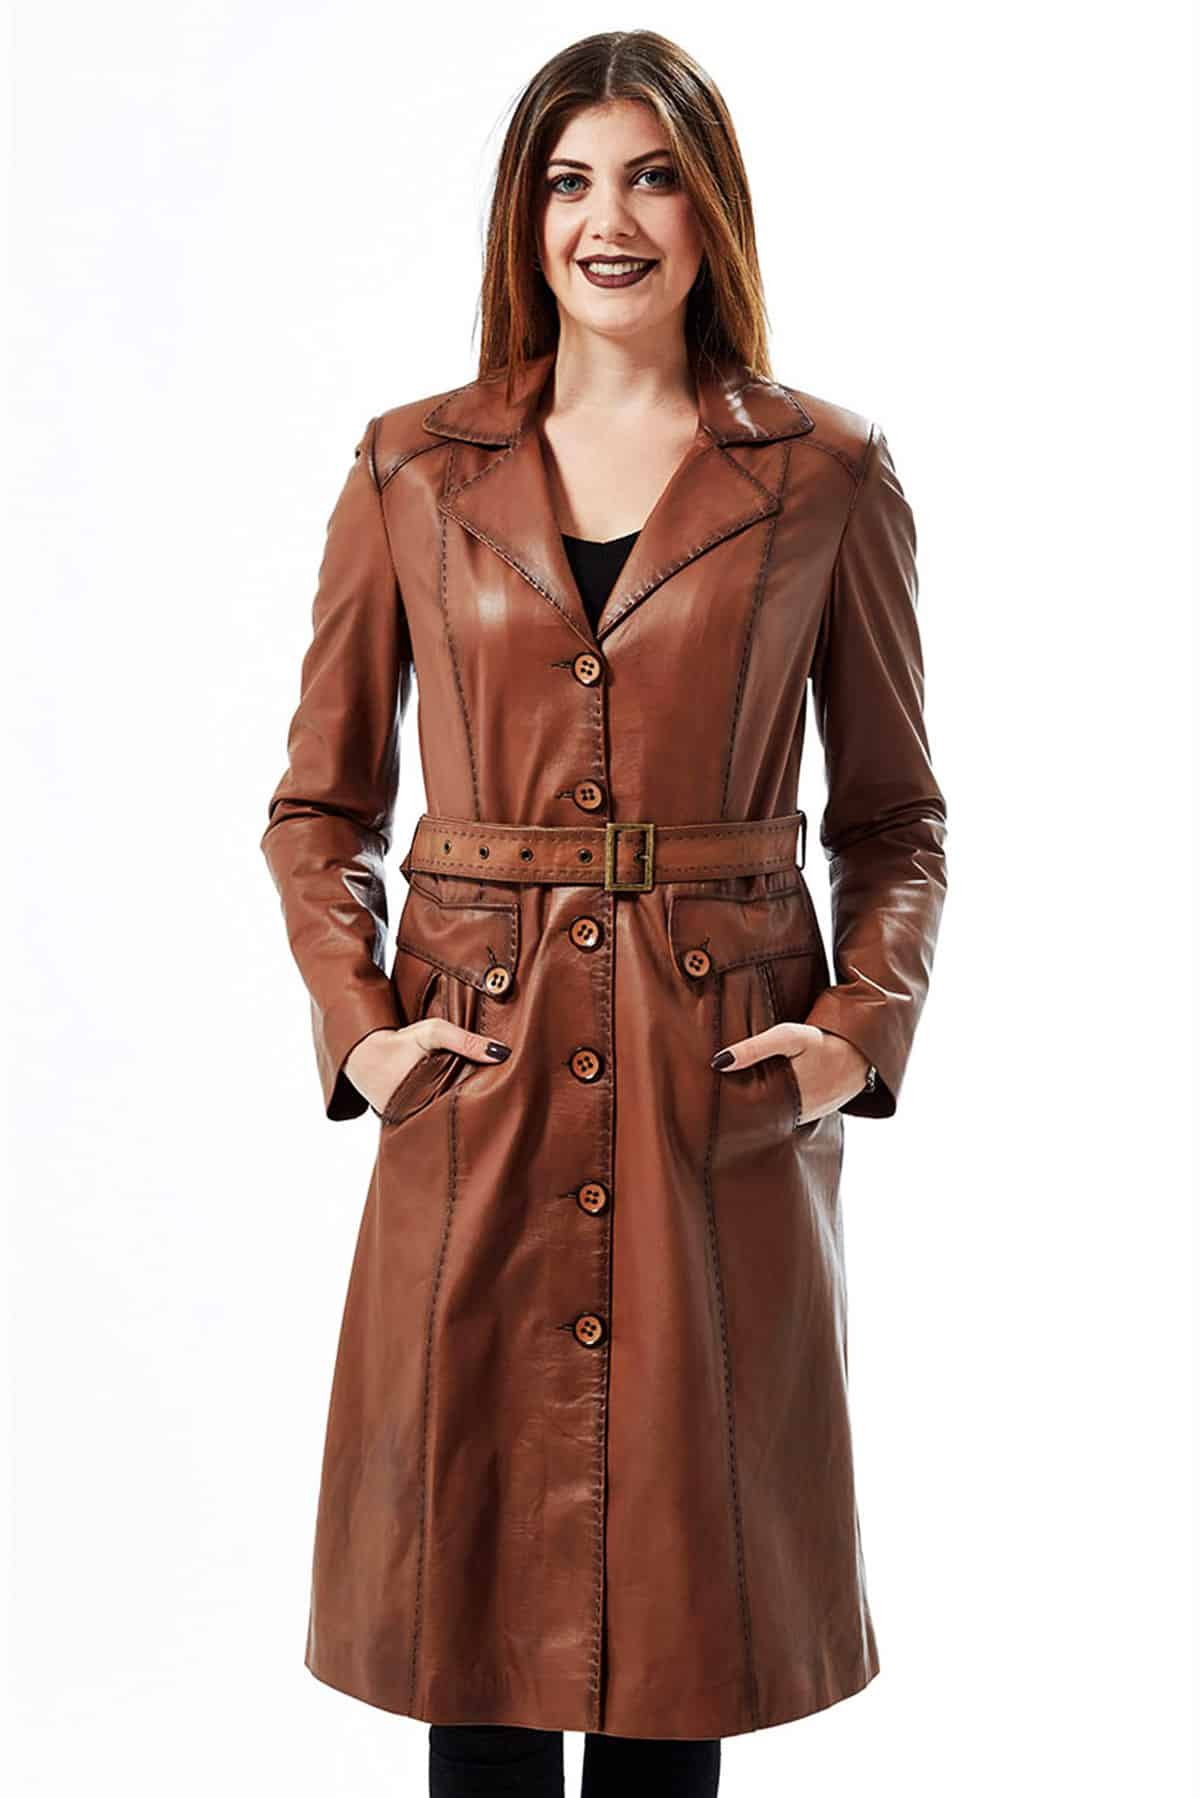 Women's Trench Coats, Long, Short & Leather Trench Coats